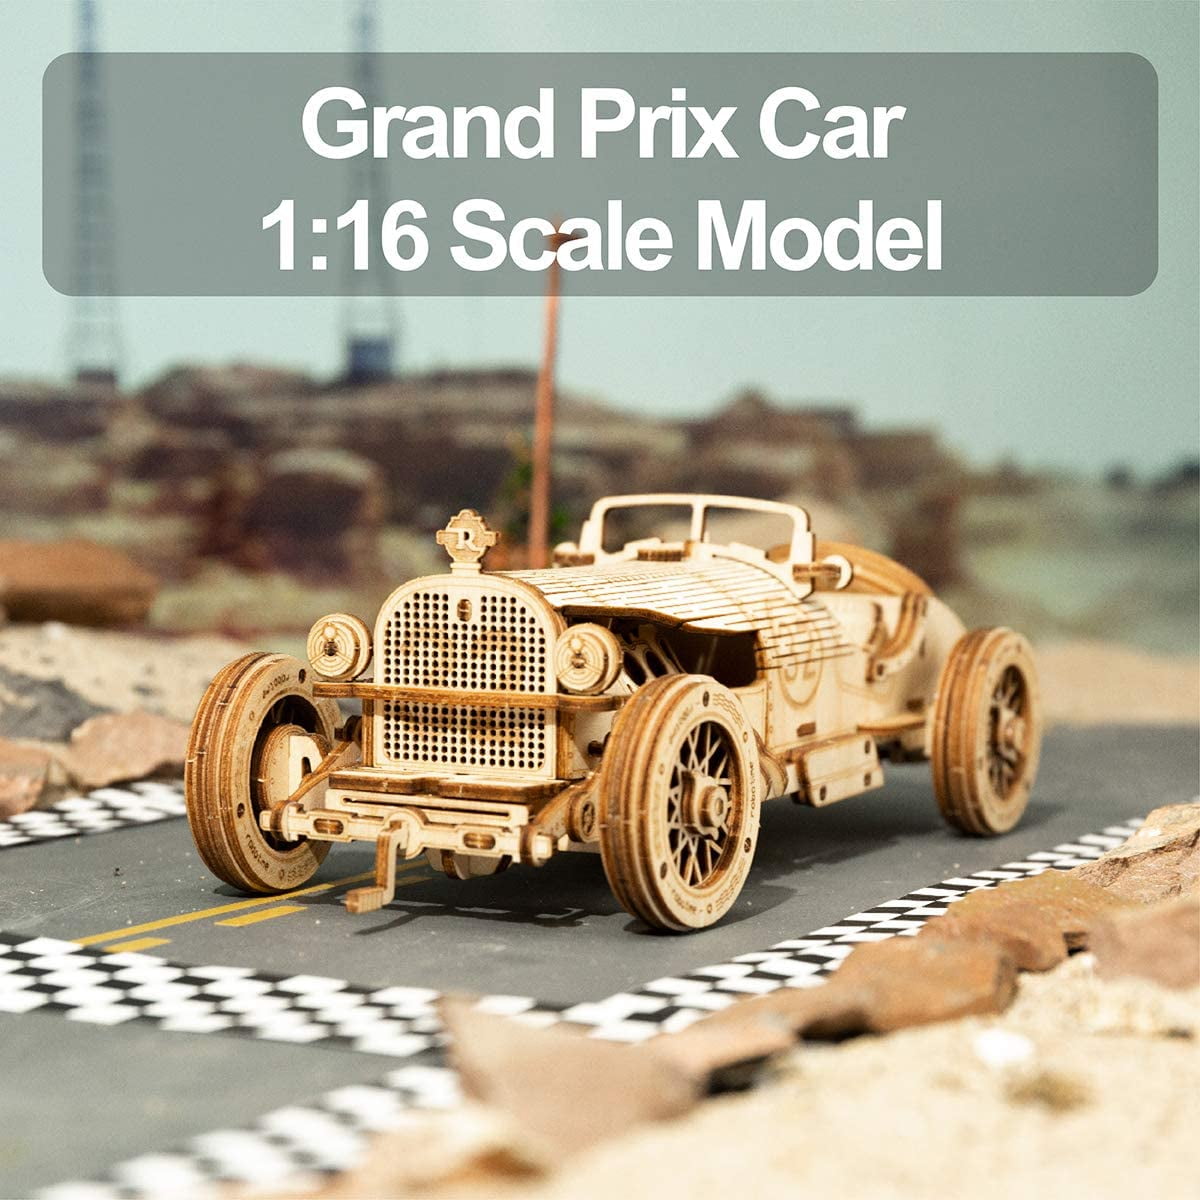 Grand Prix Car Model 3D Wooden Puzzle DIY Mechanical Toy Assembly Gears Kit Auto 